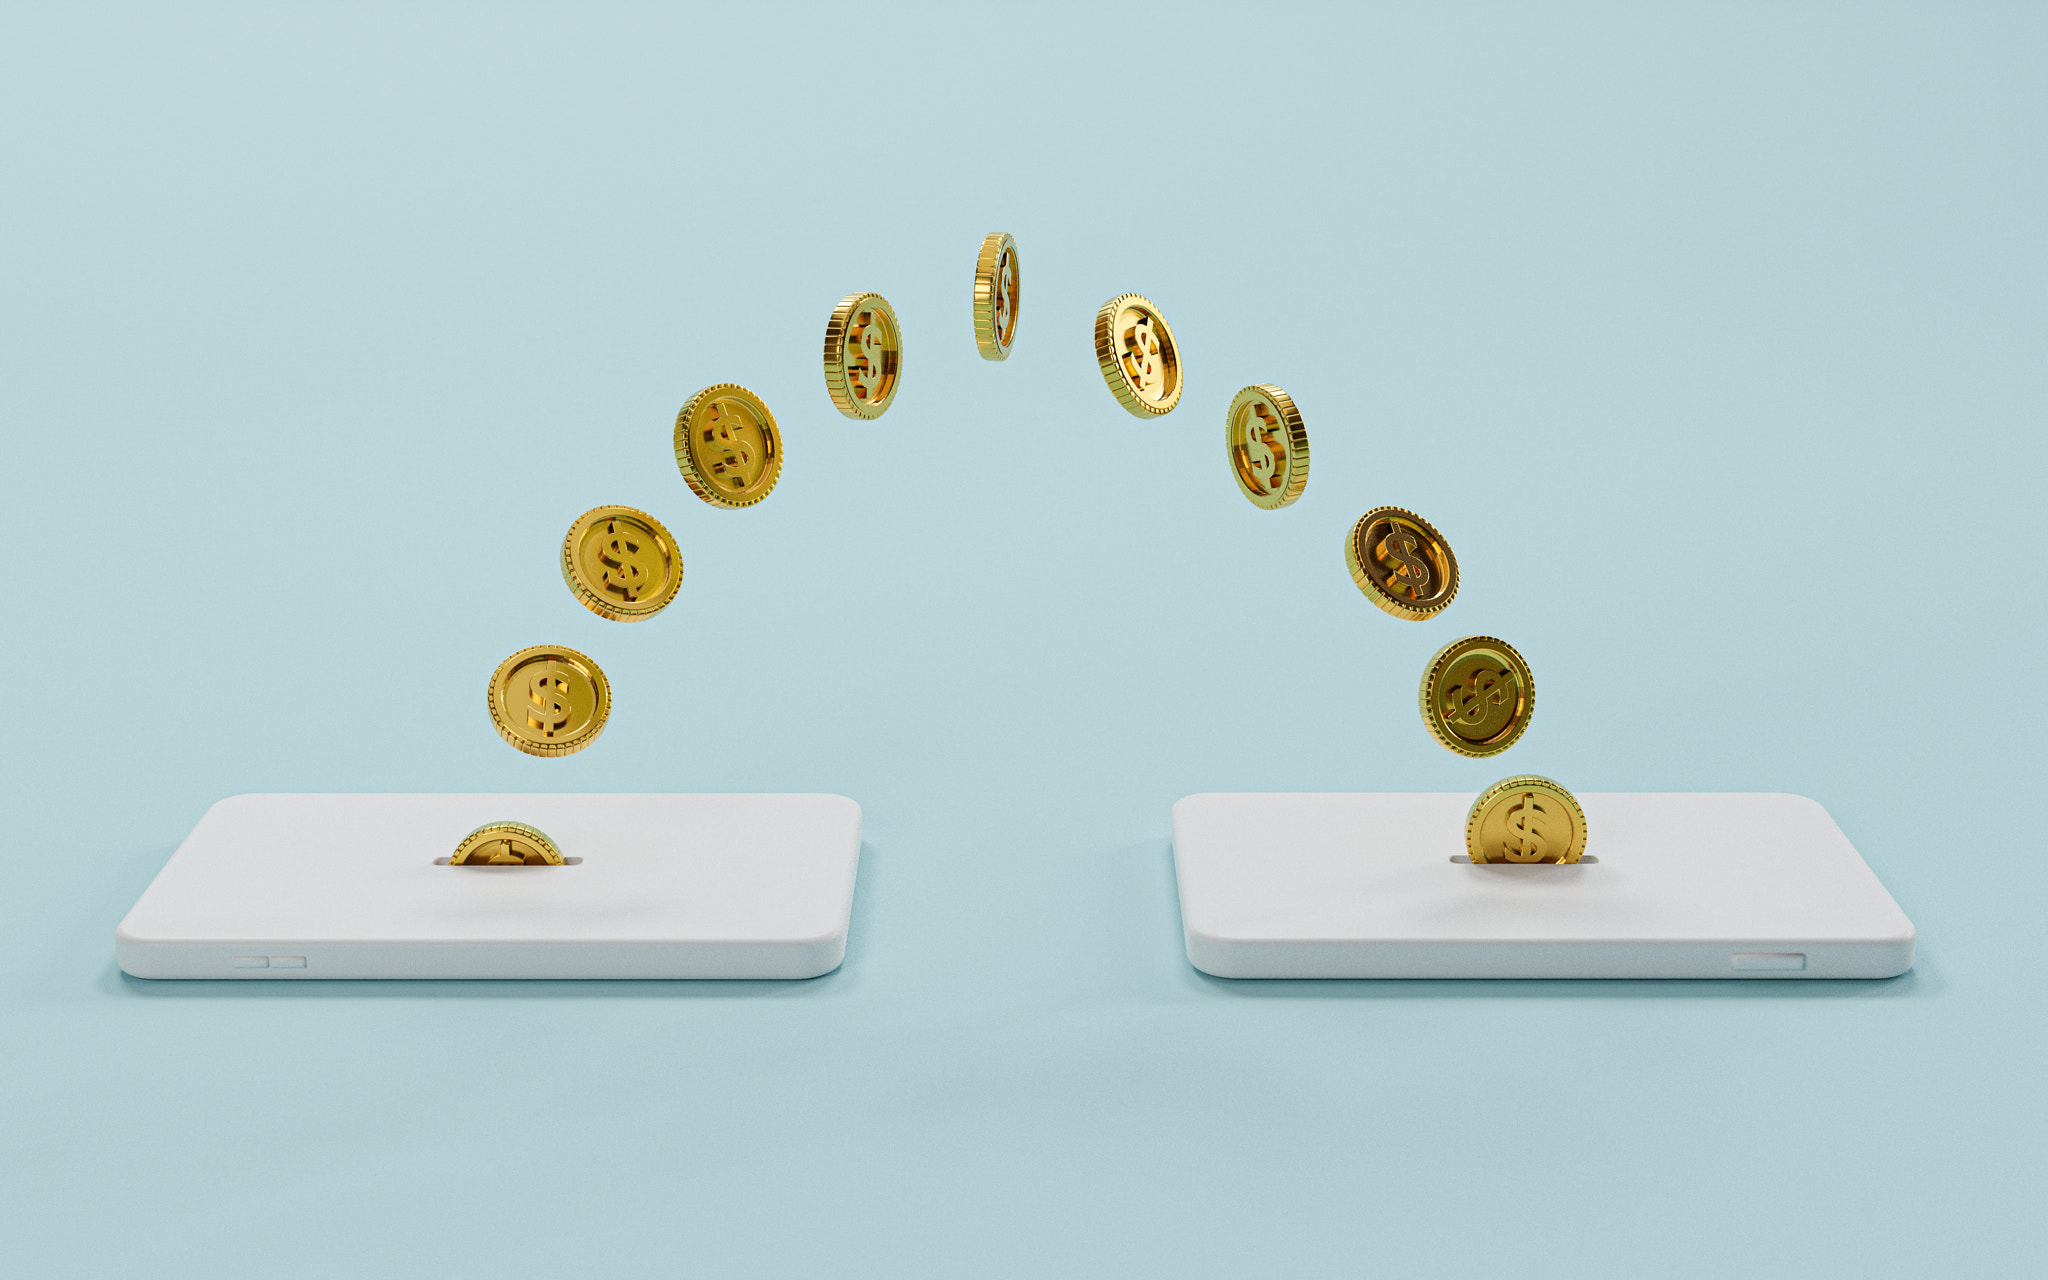 Golden coins moving between mobile phone for money transfer and internet mobile banking or electroni